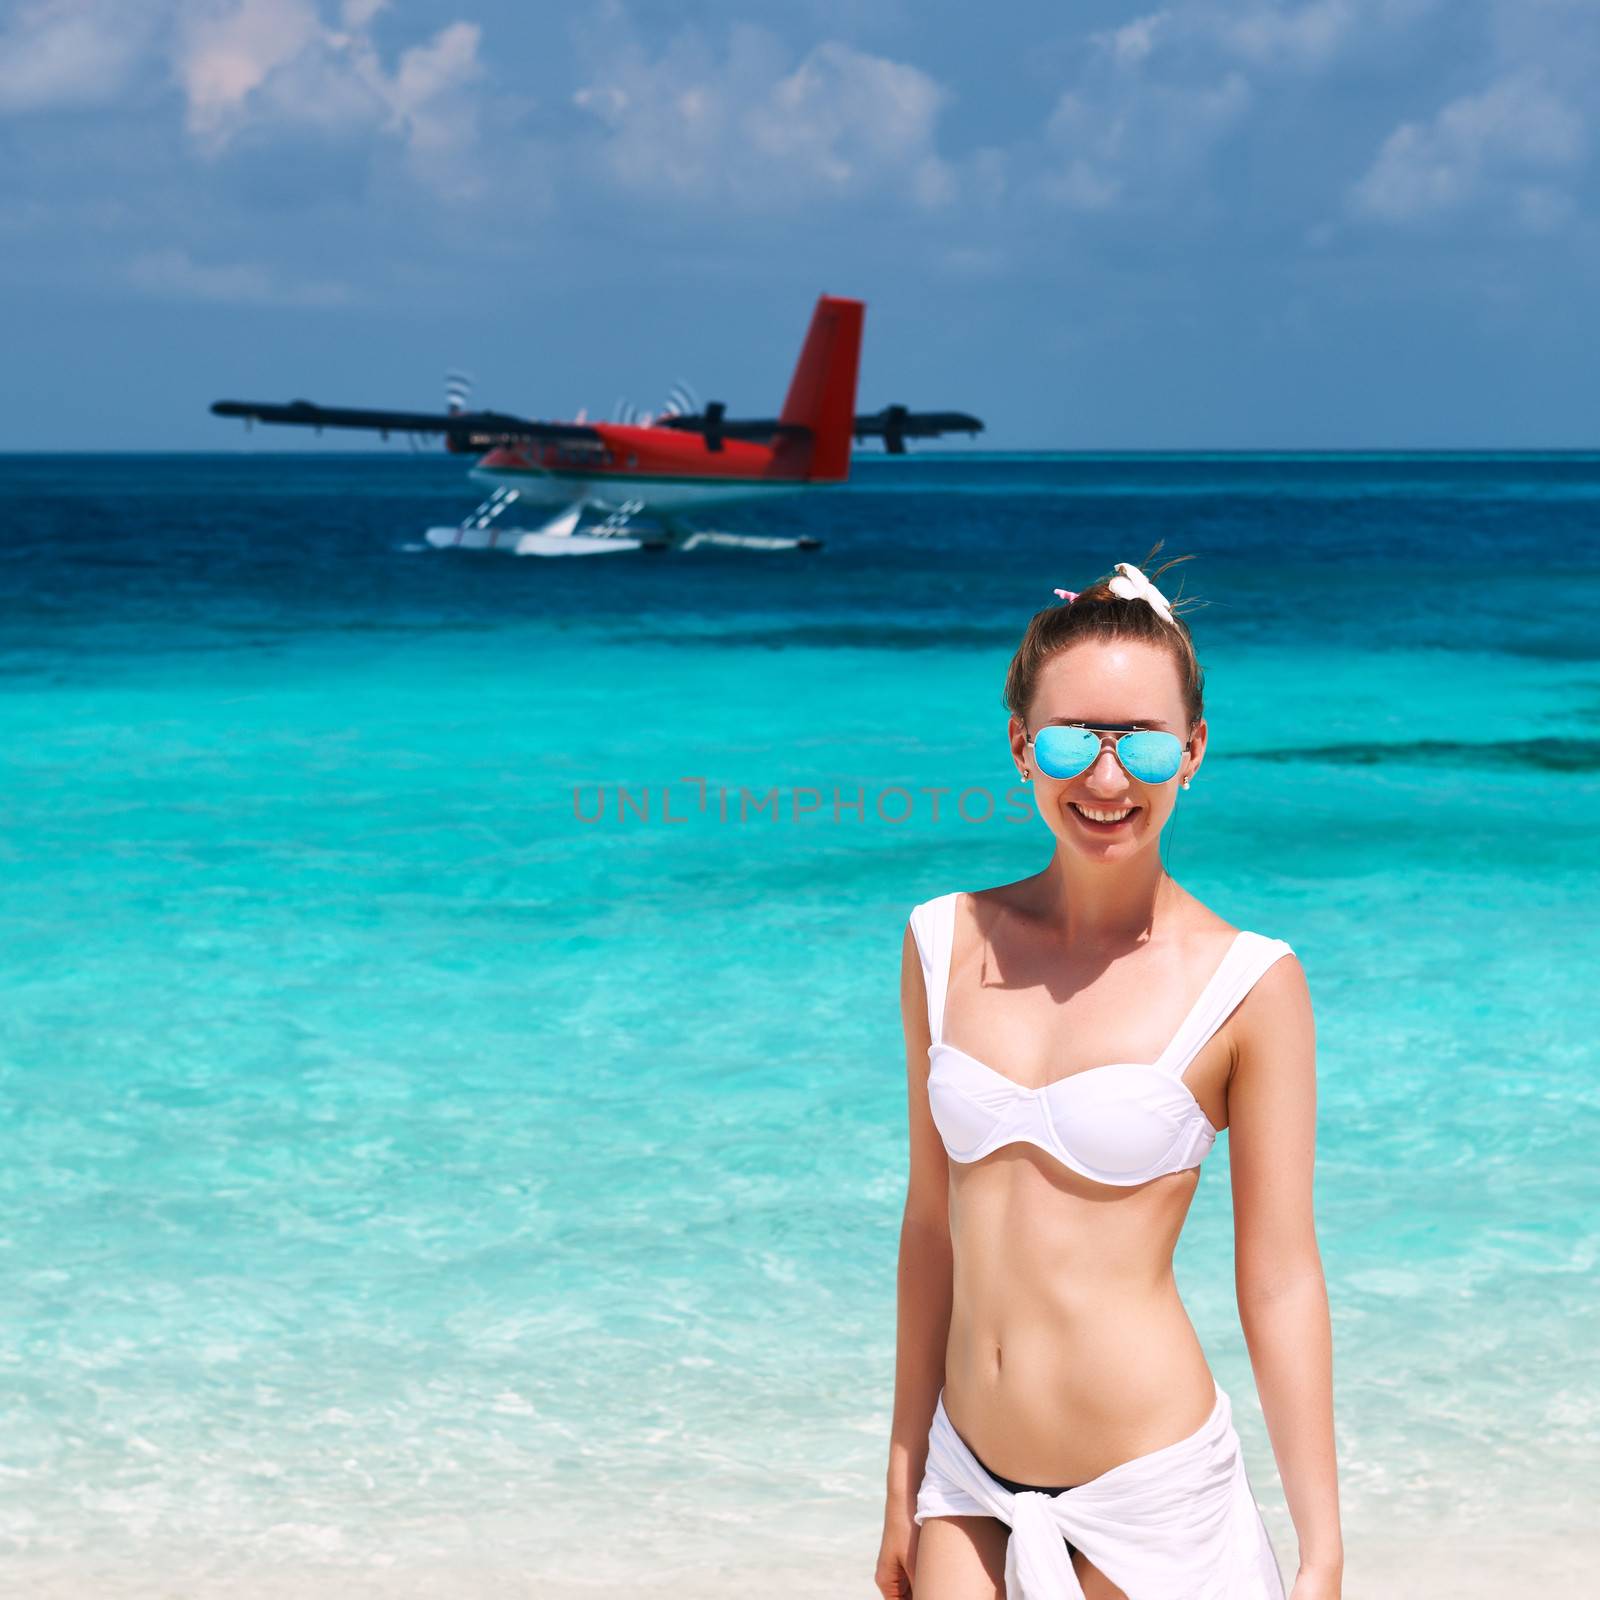 Woman at beach. Seaplane at background. by haveseen